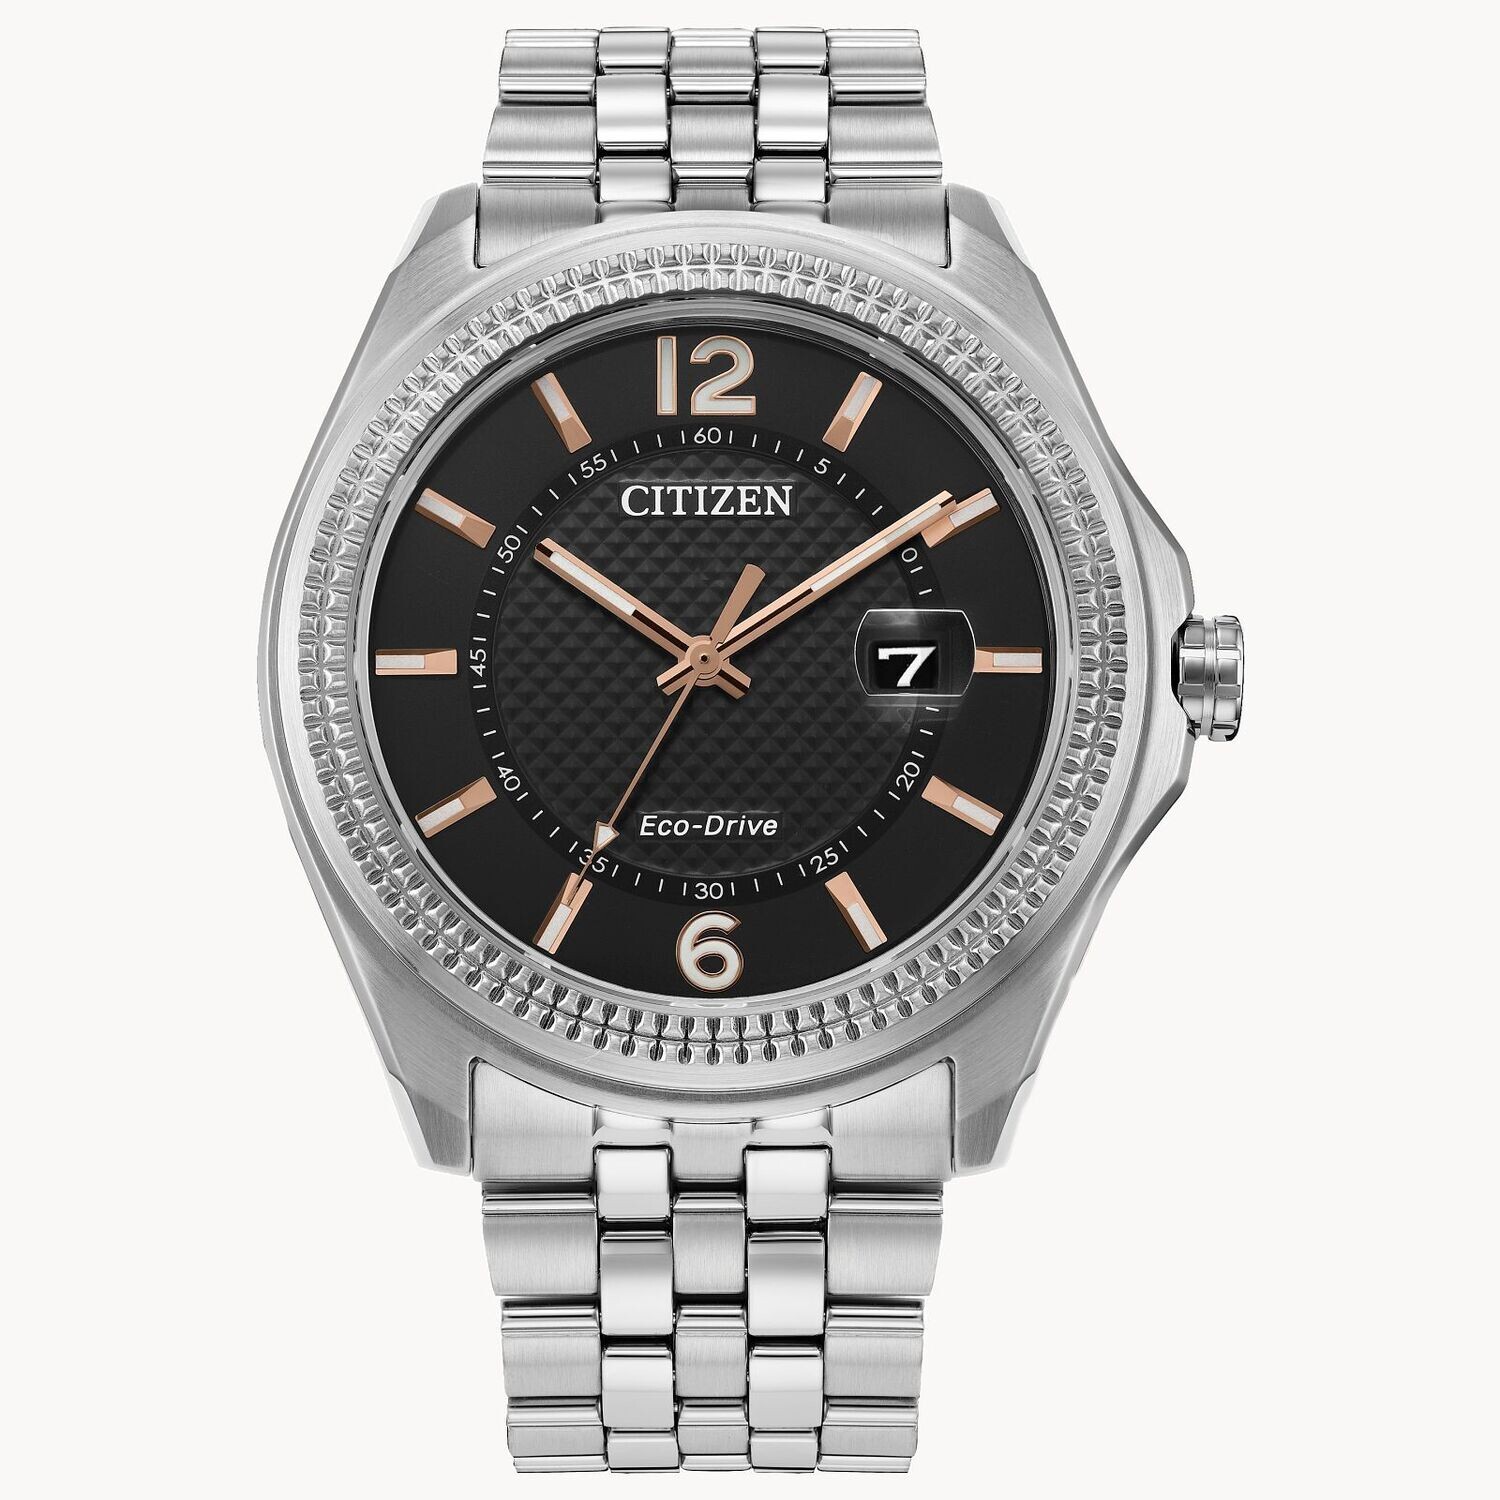 Citizen Eco-Drive Corso AW1740-54H 42mm 100m WR stainless steel bracelet Eco-drive movement (solar or light powered) men’s watch